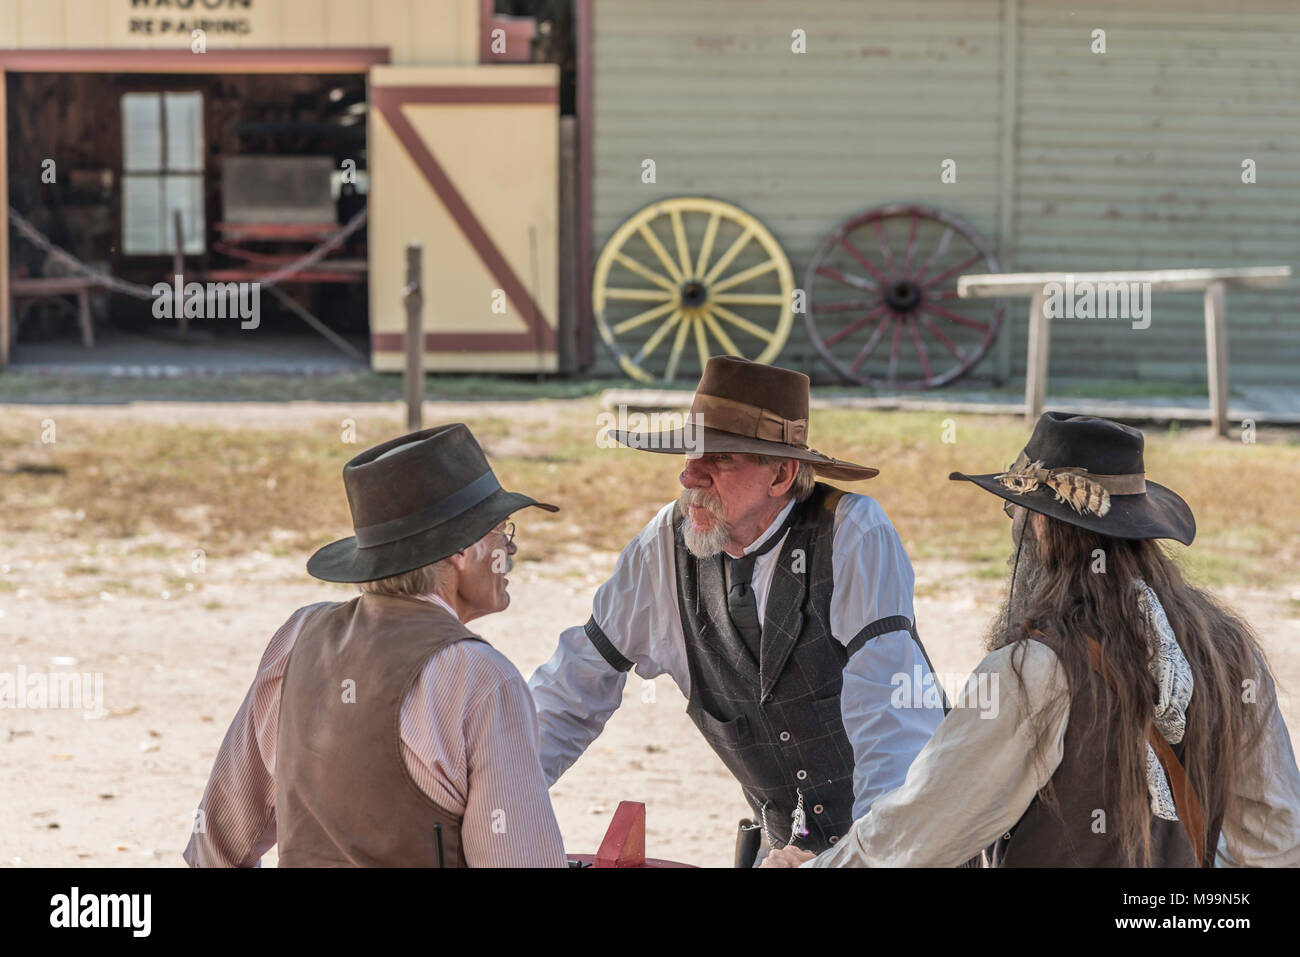 Wichita, Kansas / October 14, 2015: Old Cow Town is a living history museum where costumed interpreters recreate a frontier settlement on the Chisholm Stock Photo